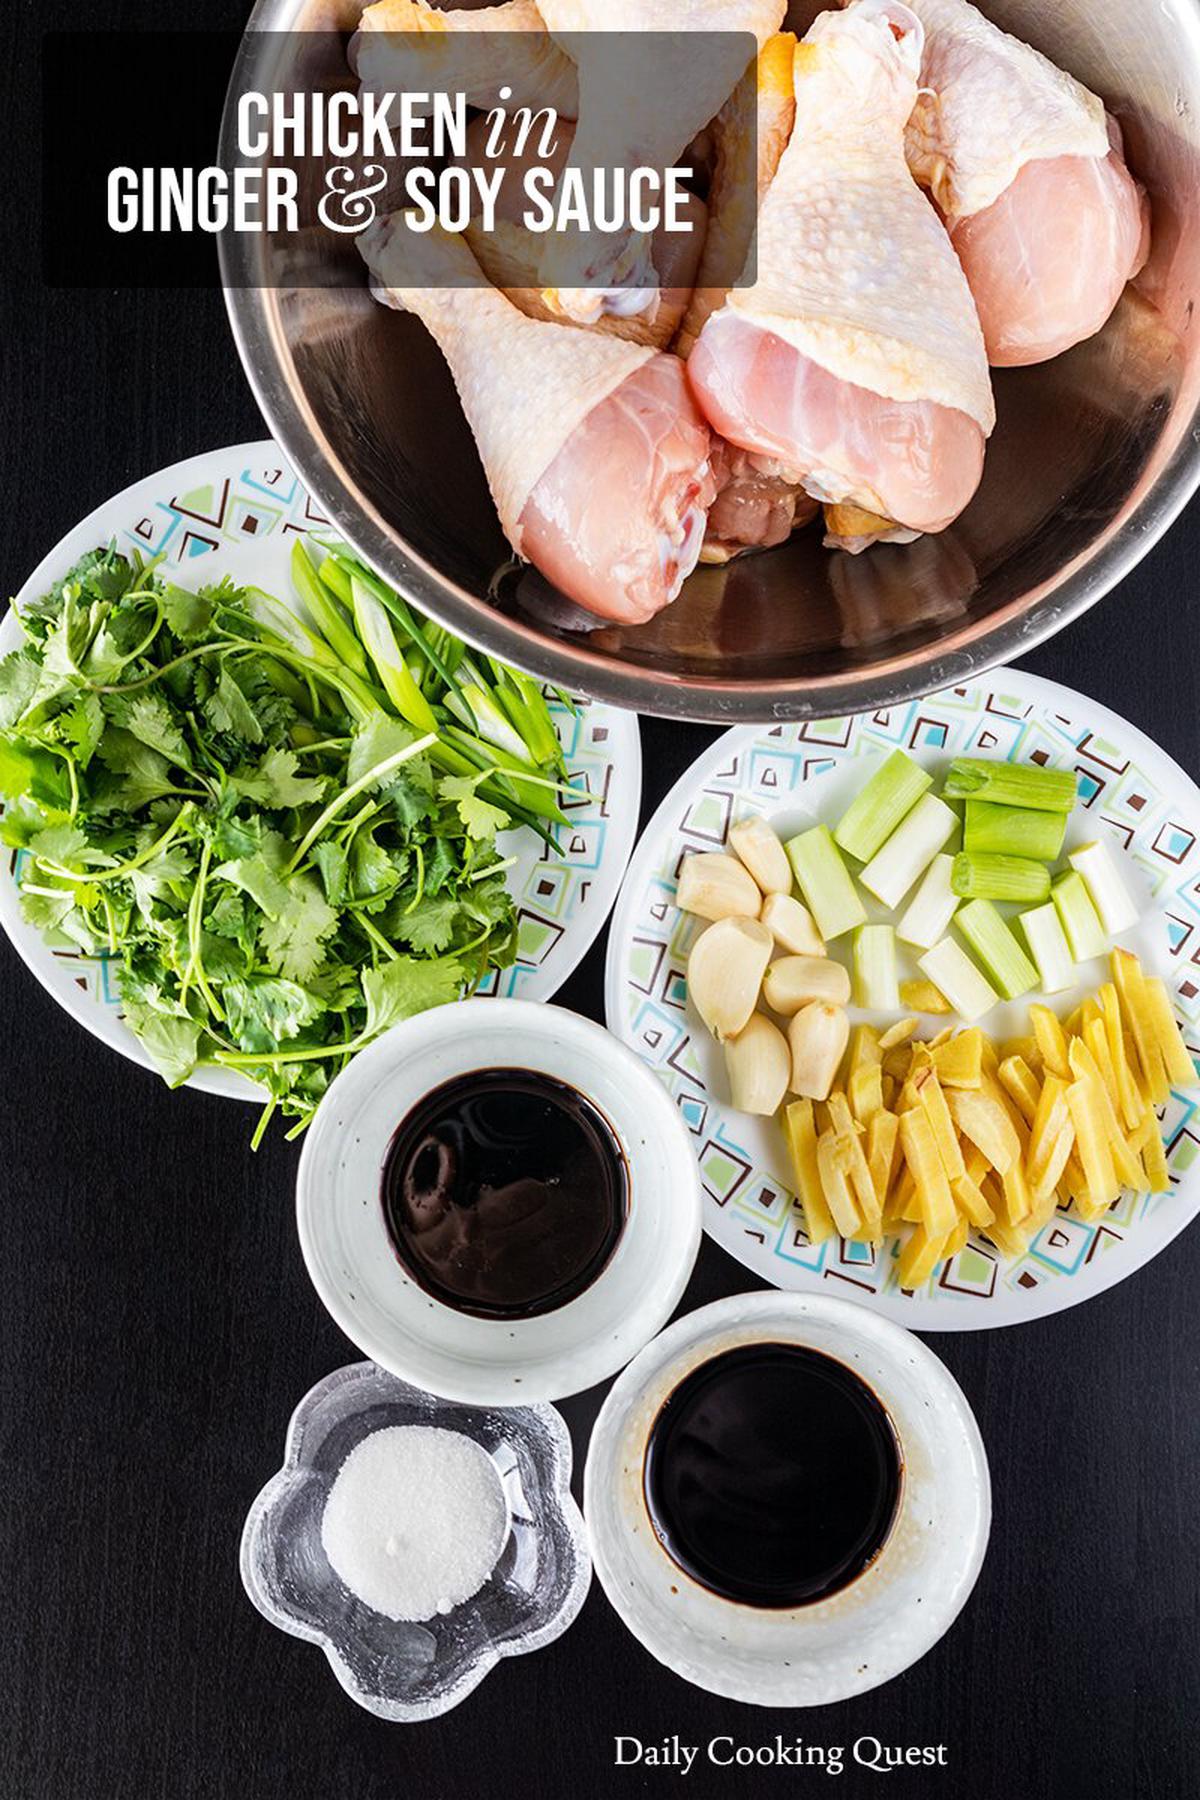 Ingredients for Chicken in Ginger and Soy Sauce